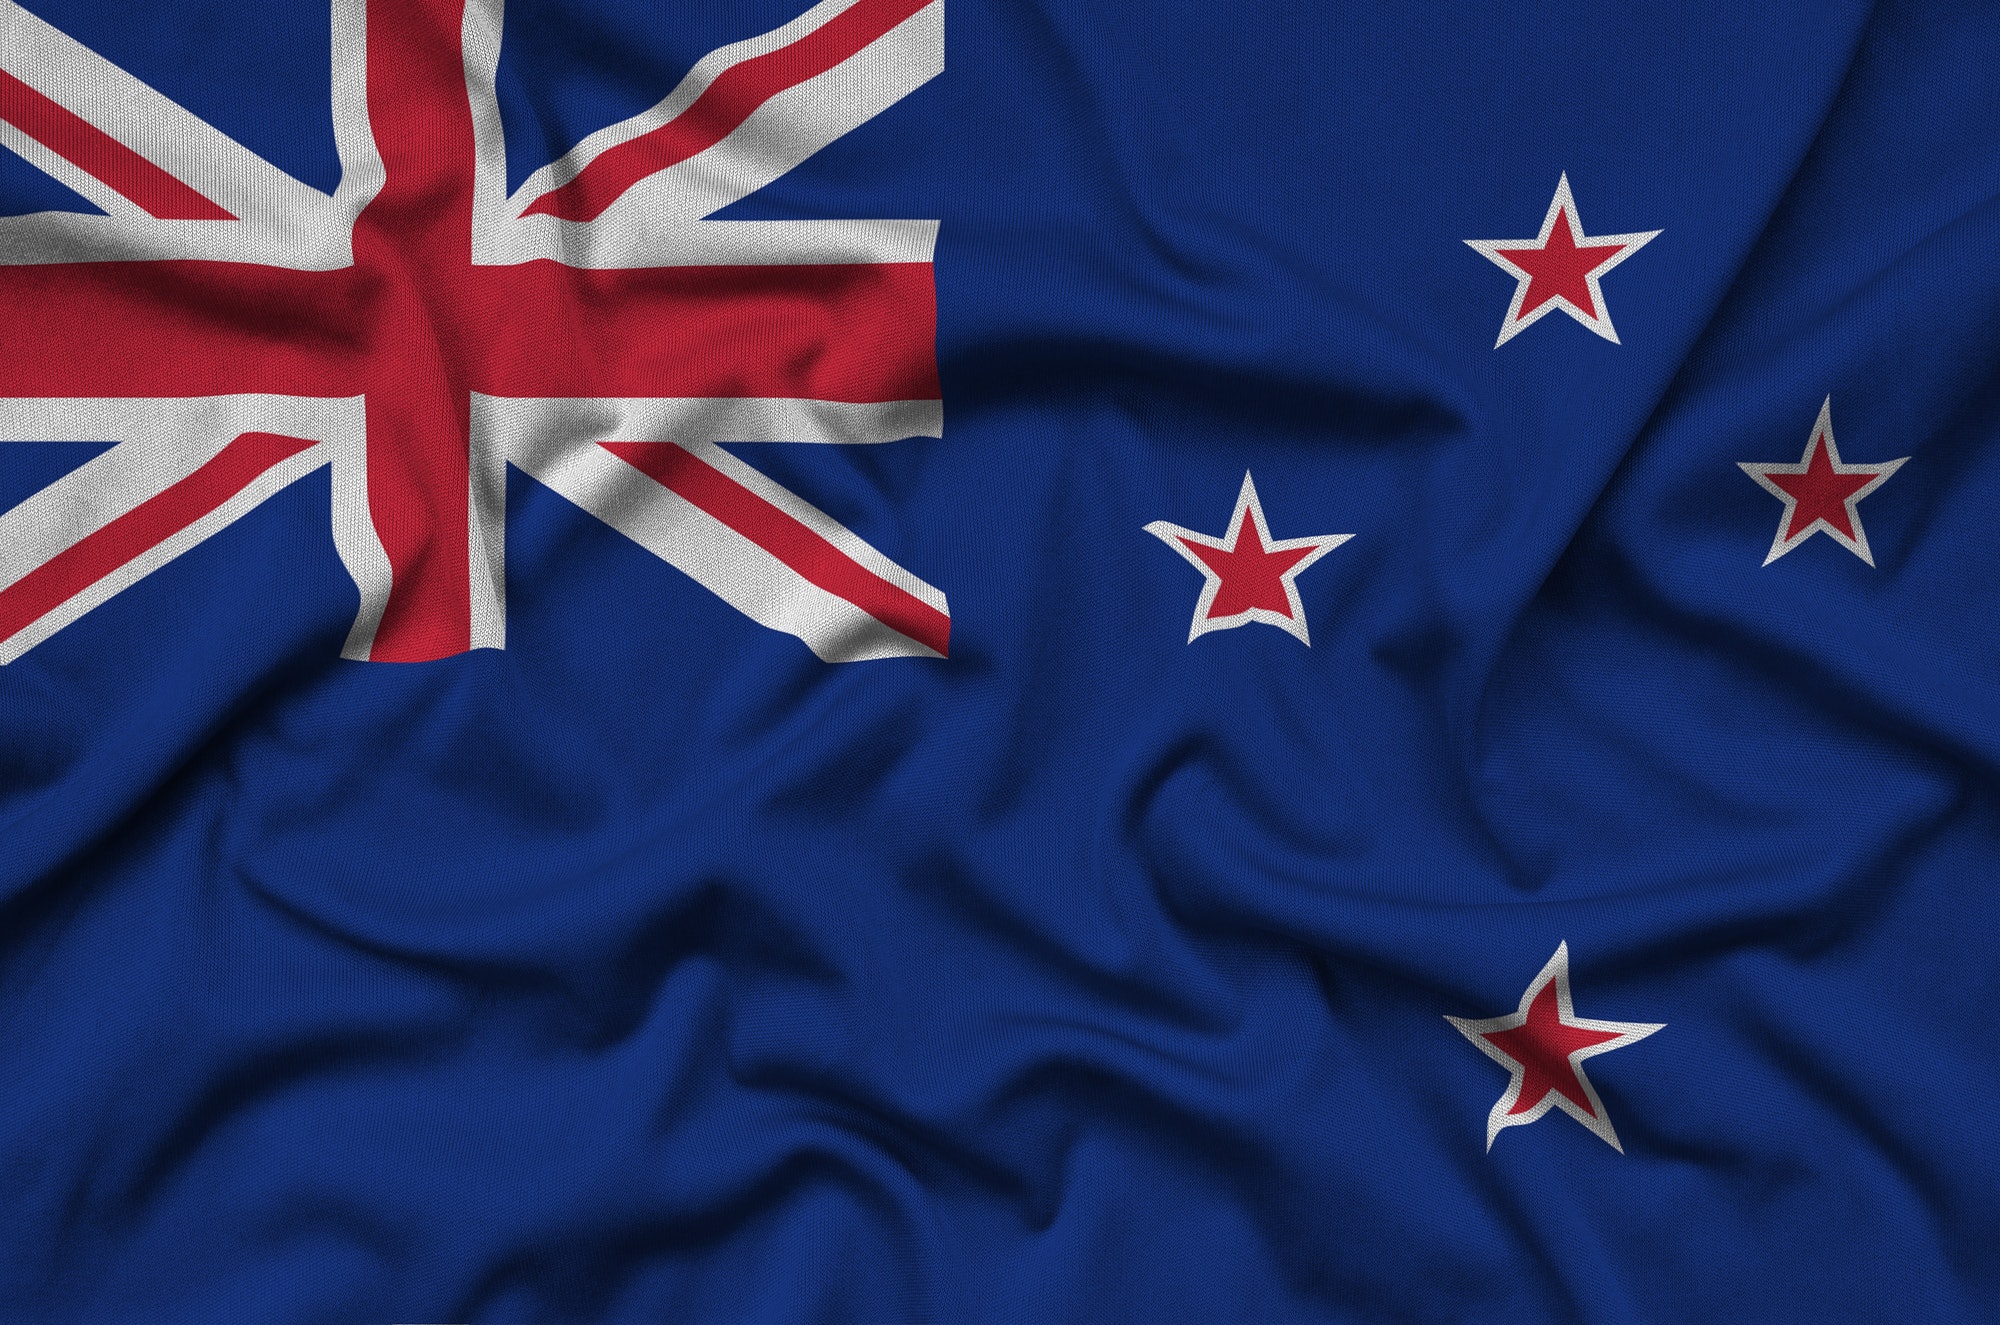 New Zealand flag is depicted on a sports cloth fabric with many folds. Sport team waving banner